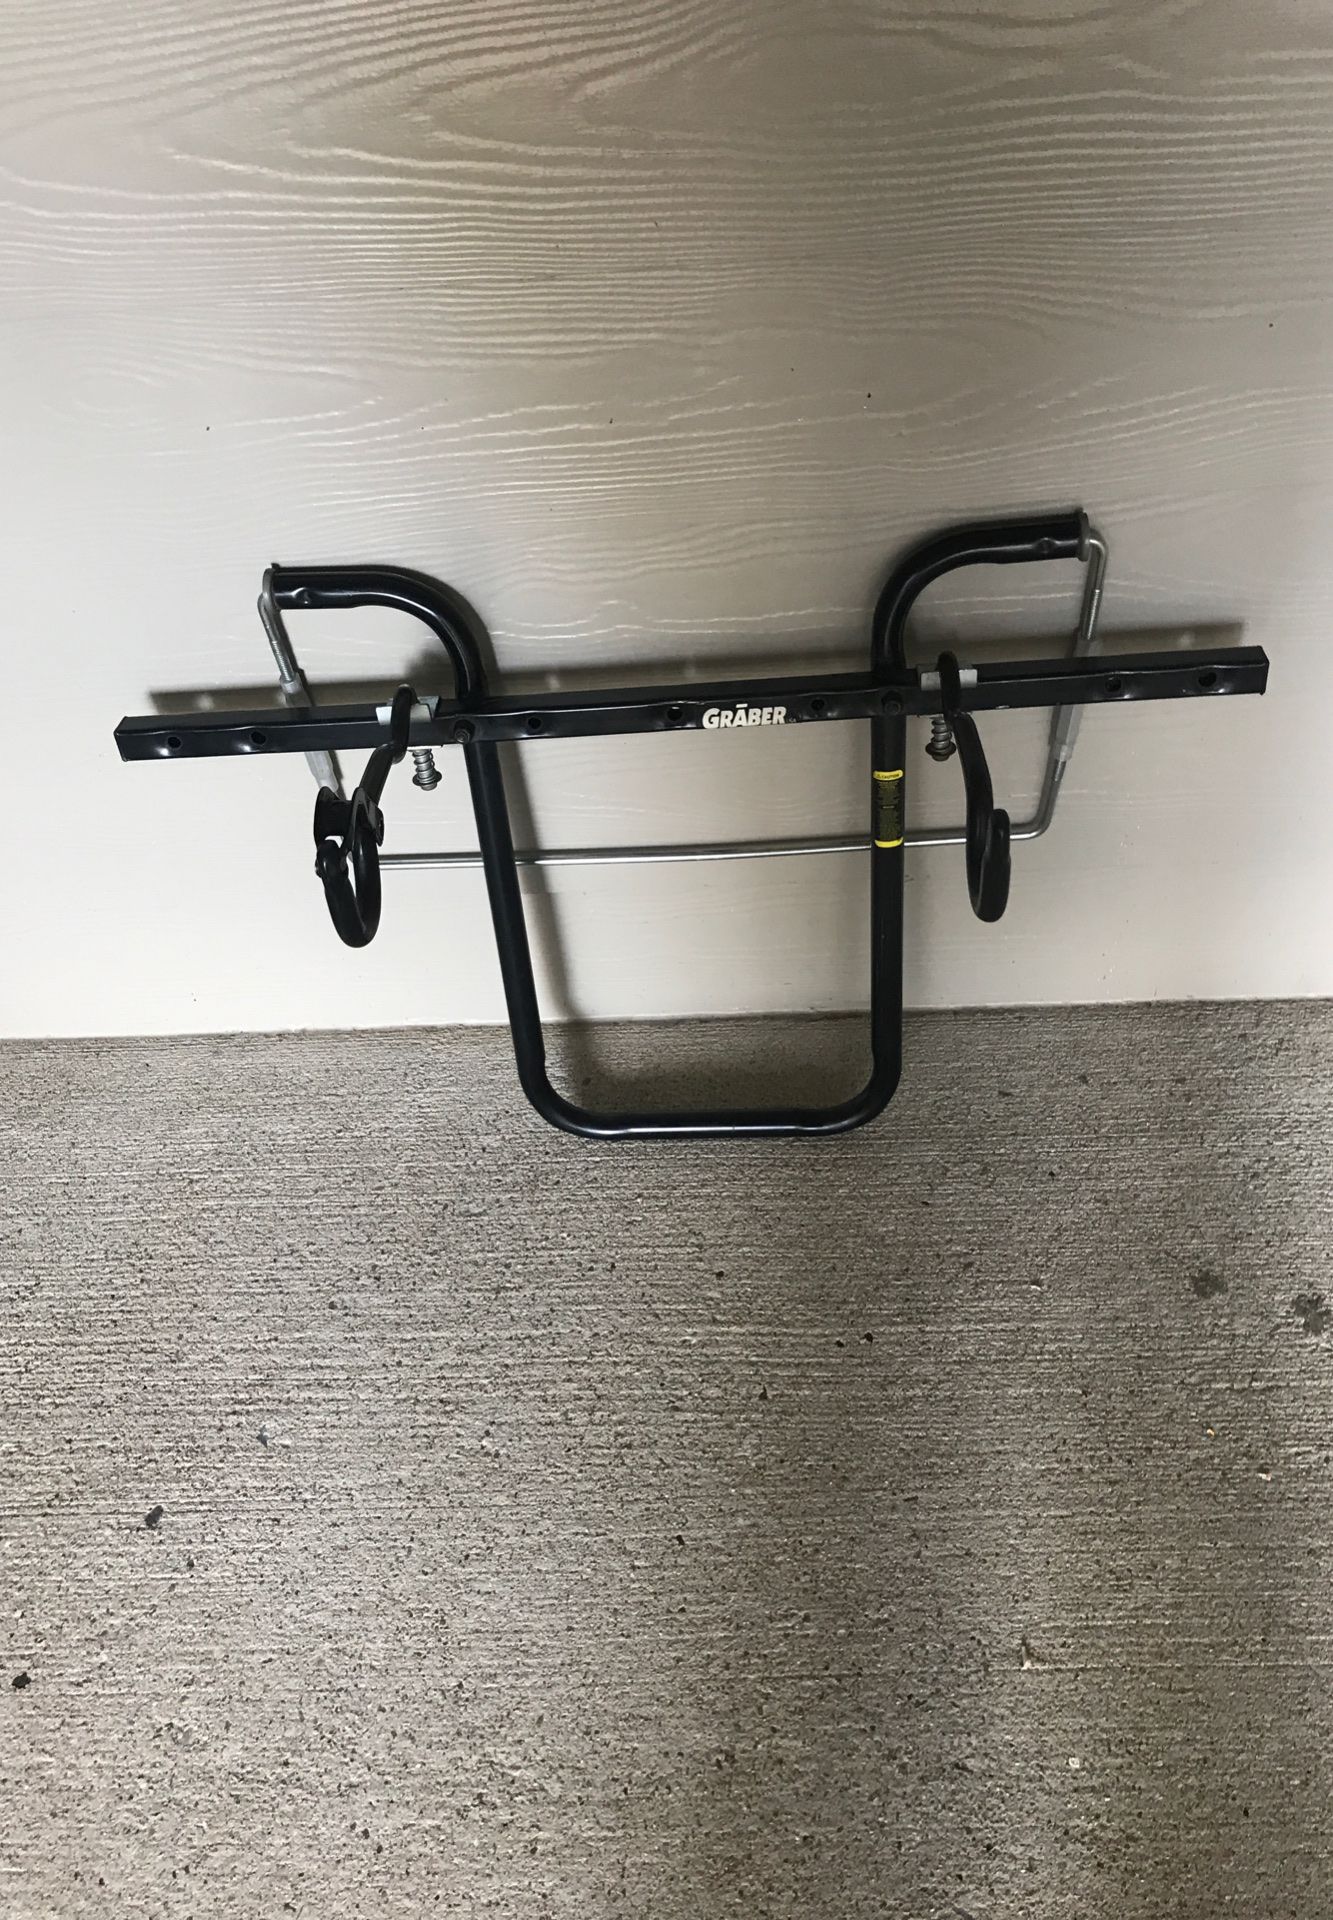 GRABER 1060S 2-Bike Spare Tire Bicycle Rack & Lock - Assembled Ready to Use